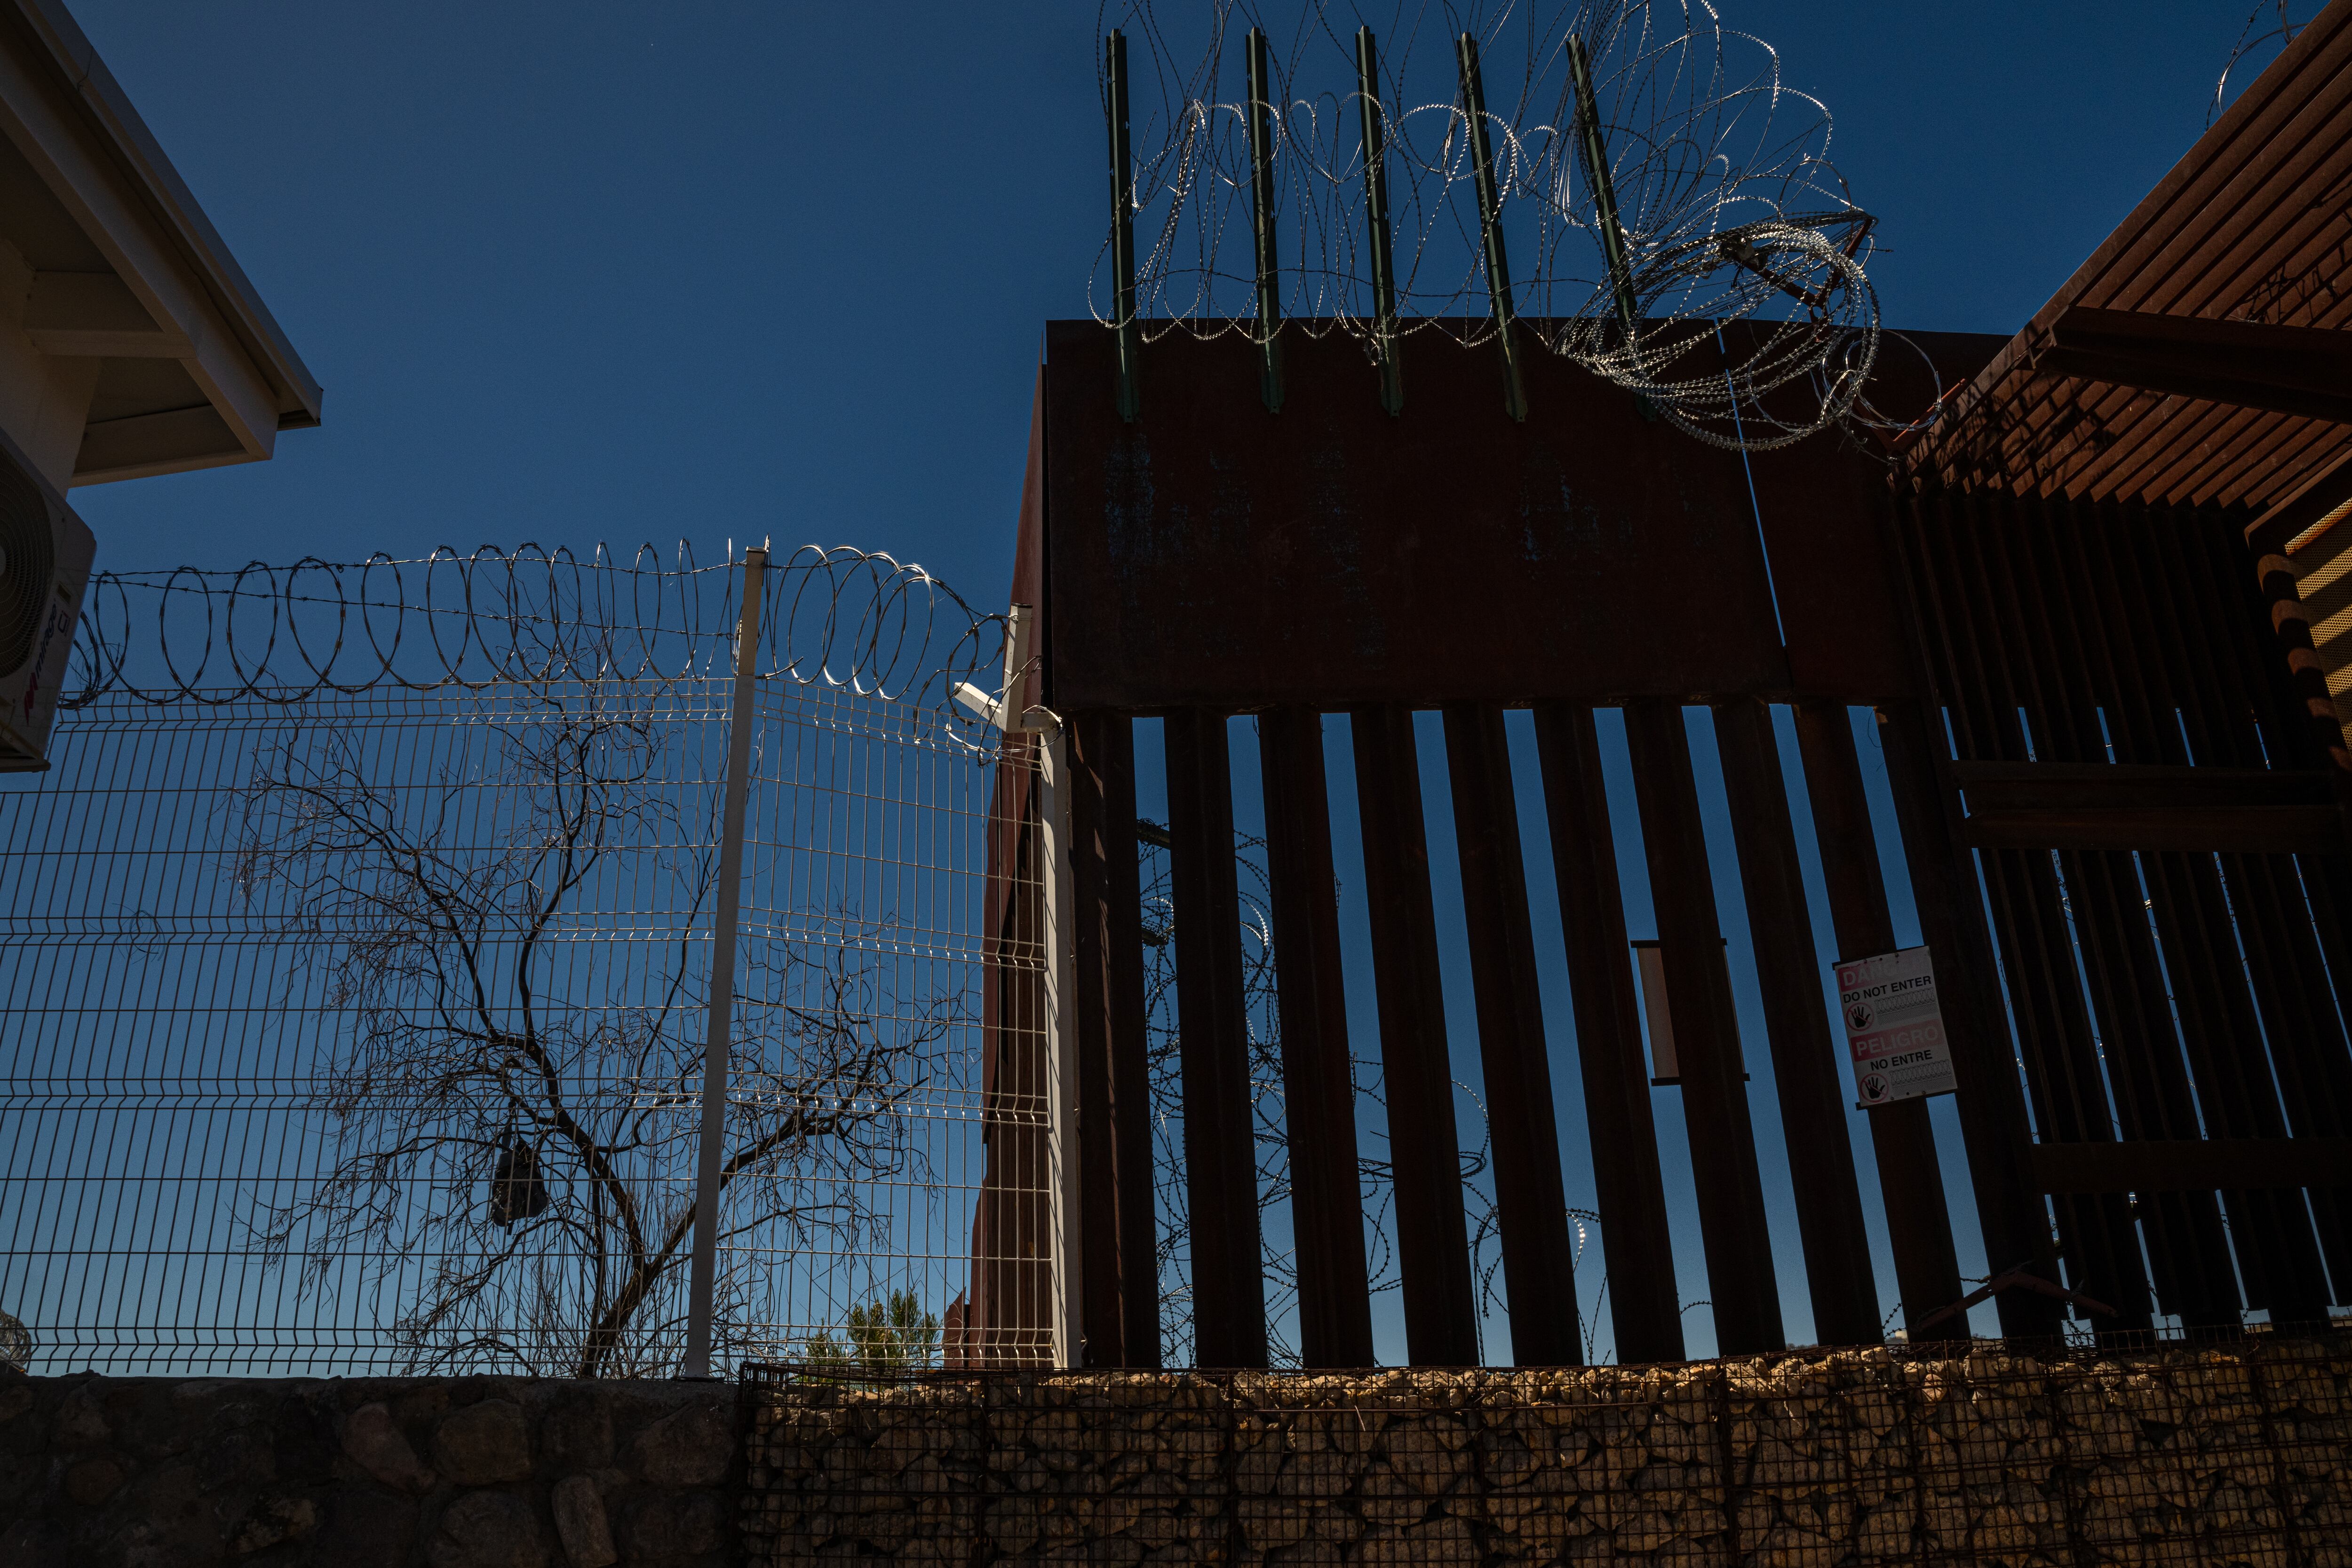 Razor wire sits atop the U.S.-Mexico border fence in Nogales, Ariz., as seen here on March 27.